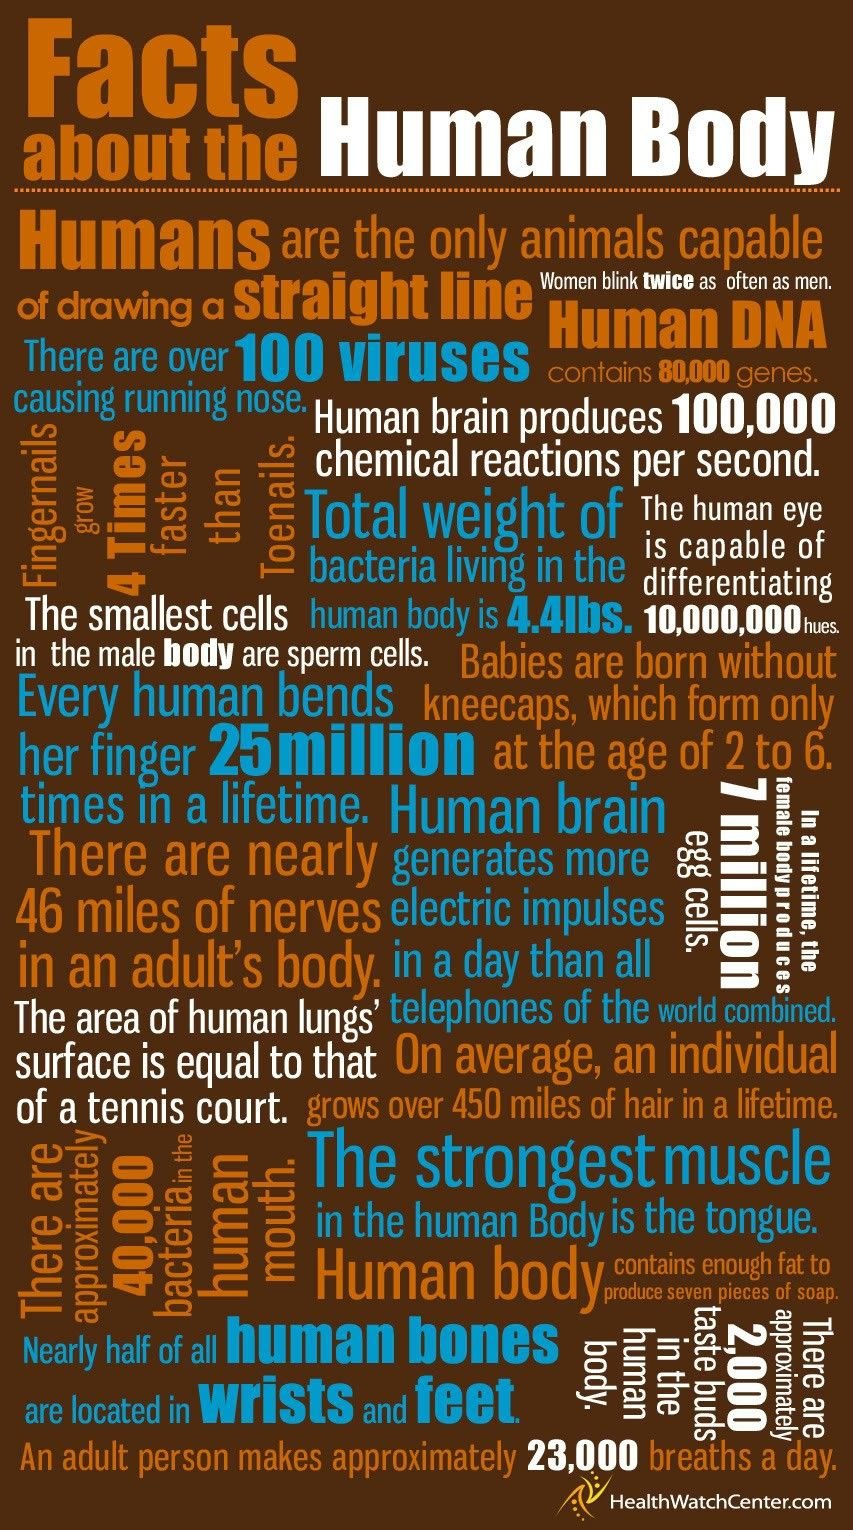 Facts about the Human Body.